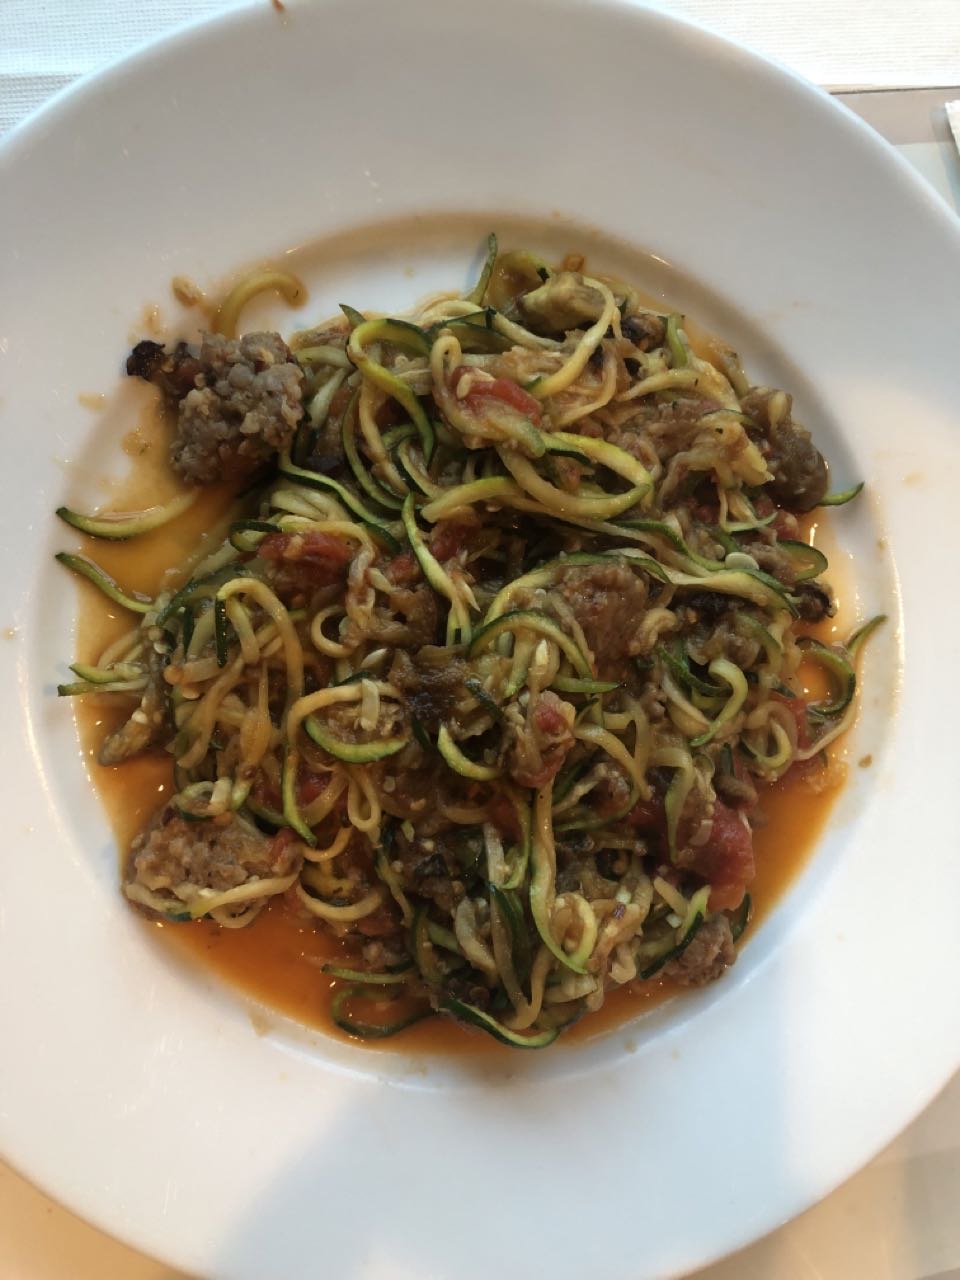 delicious-and-nutritious-Spicy-Eggplant-and-Sausage-Zucchini-Pasta-Not-best-598640a1-3ba0-41e0-8005-cce31711ec44-post-image